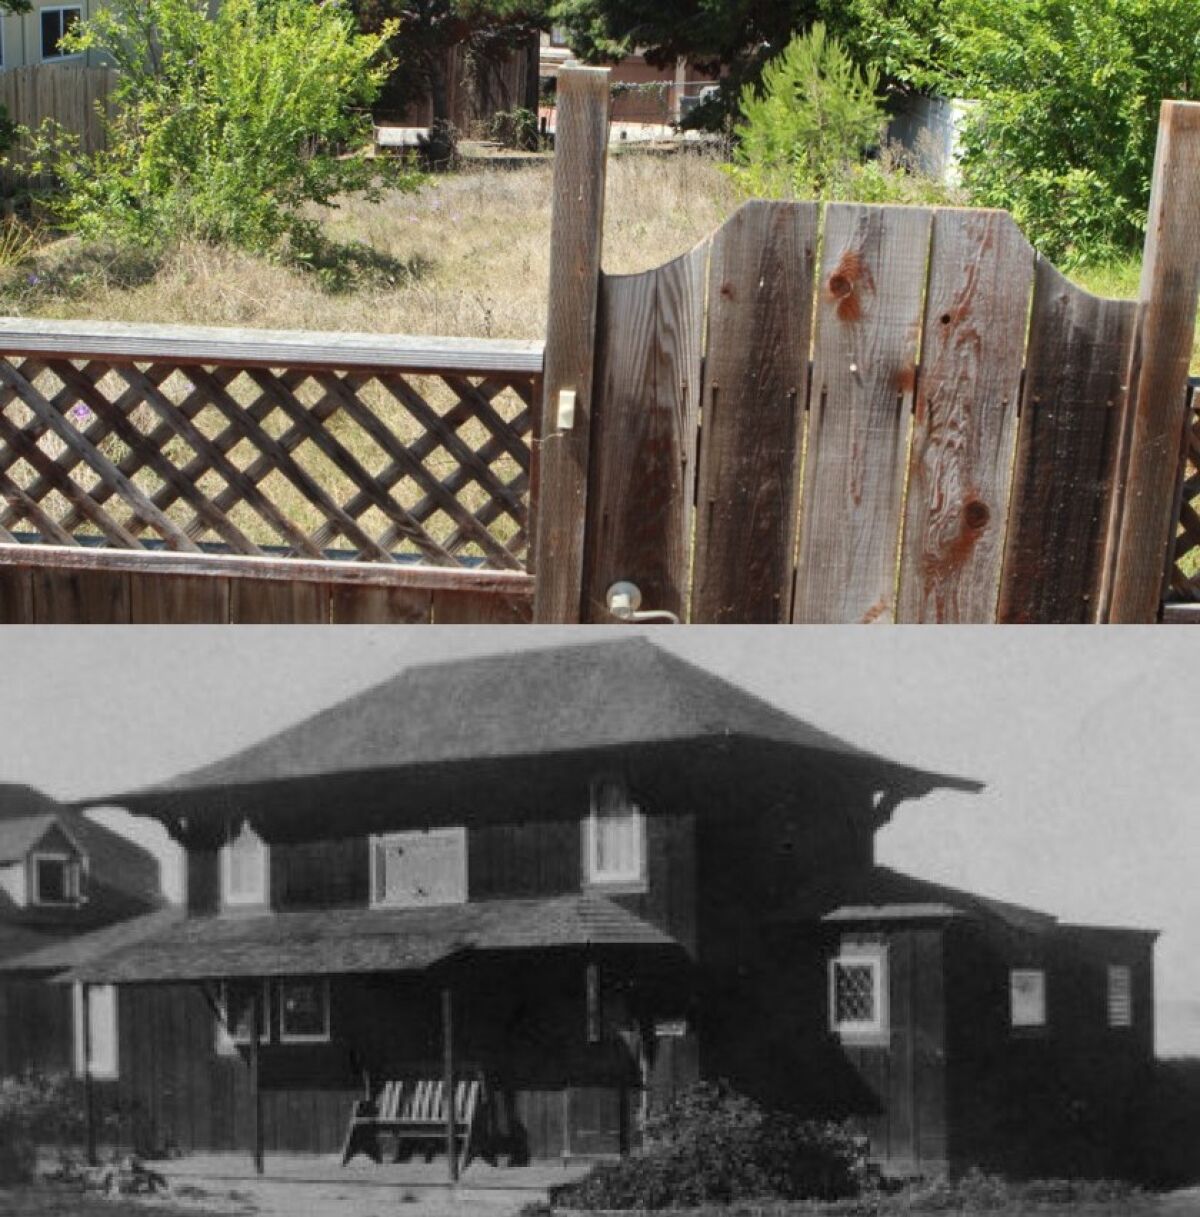 NOW (top): All that’s left of the first Irving Gill house in La Jolla, and possibly the first Craftsman home in California, is this vacant lot at 1328 Virginia Way. THEN (bottom): Windemere Cottage is photographed circa 1910, when it was located on Prospect Street.